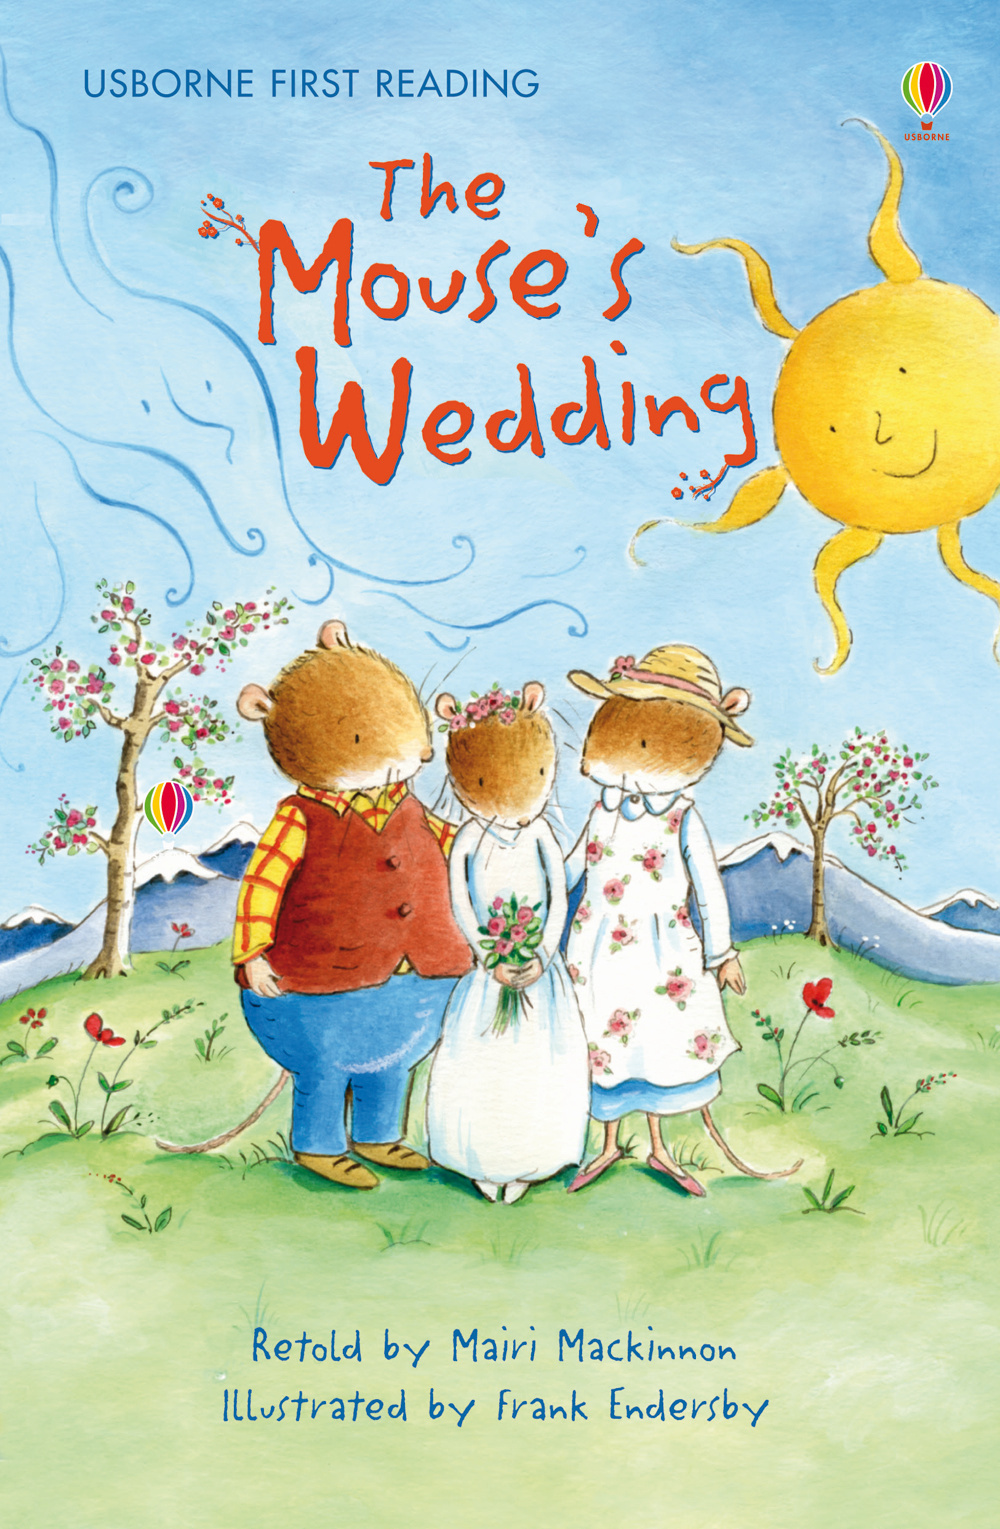 The mouse's wedding